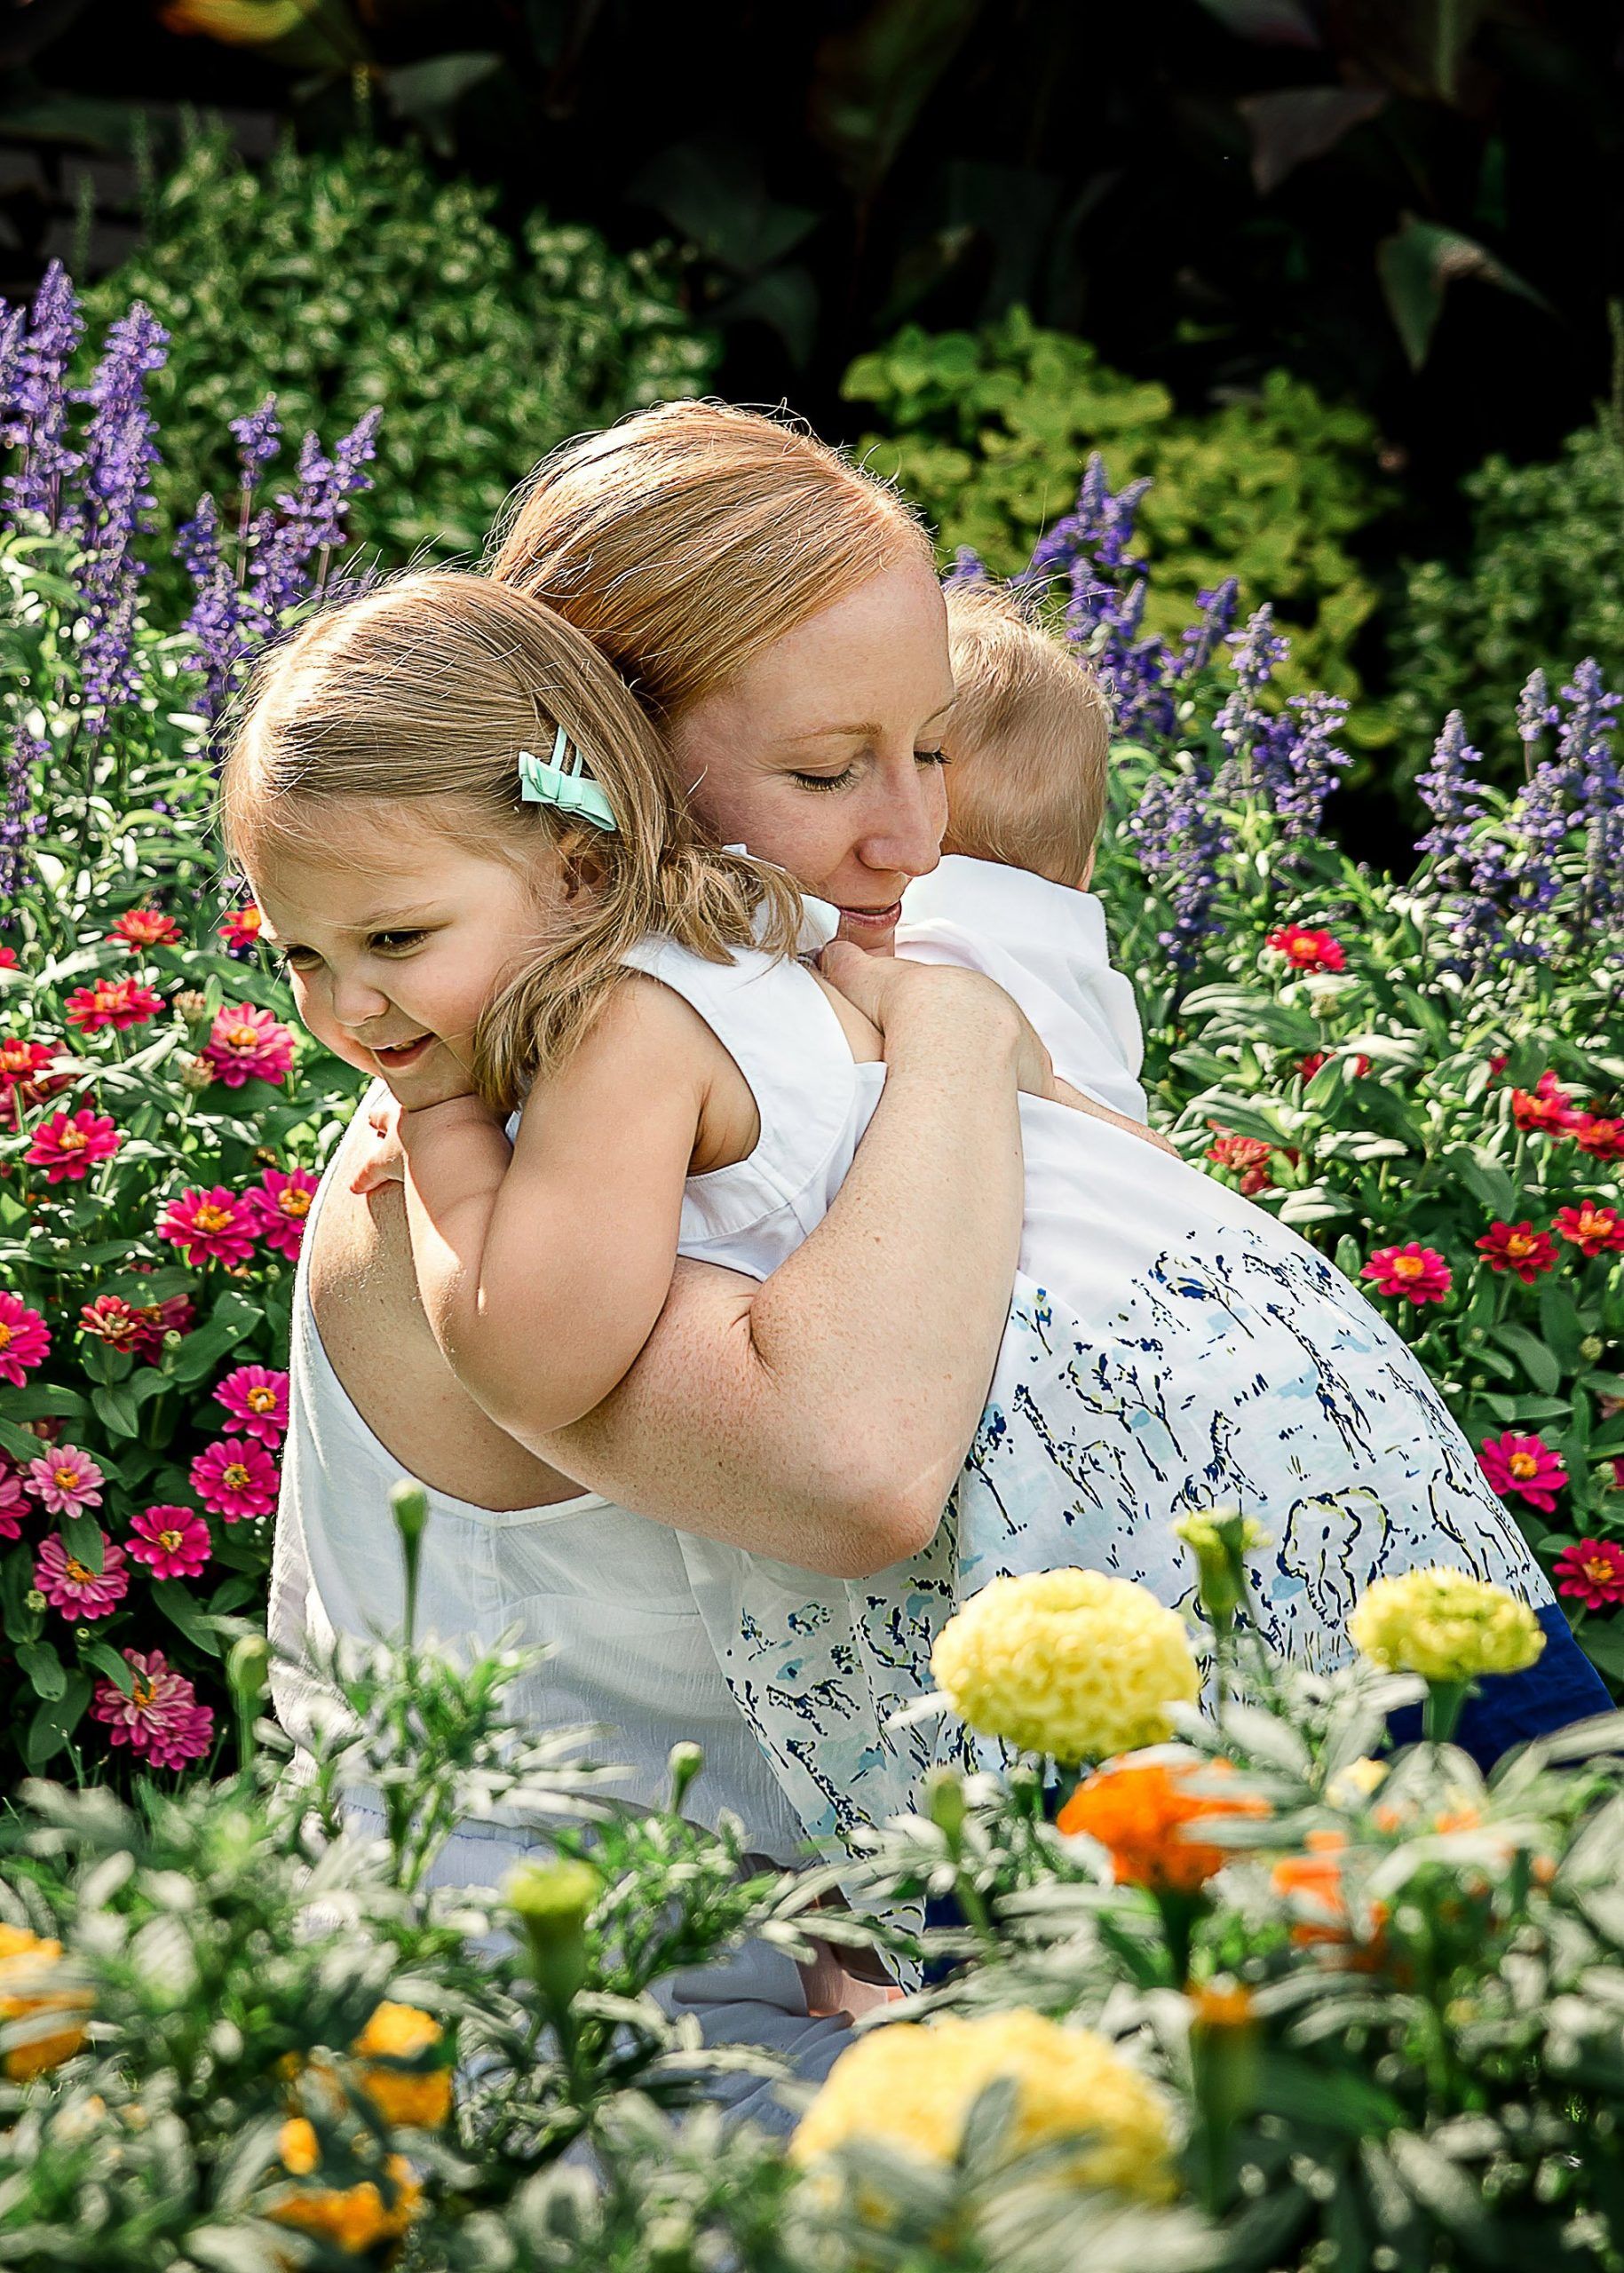 Momma hugging both of her small children in the garden surrounded by flowers Momma hugging both of her small children in the garden surrounded by flowers